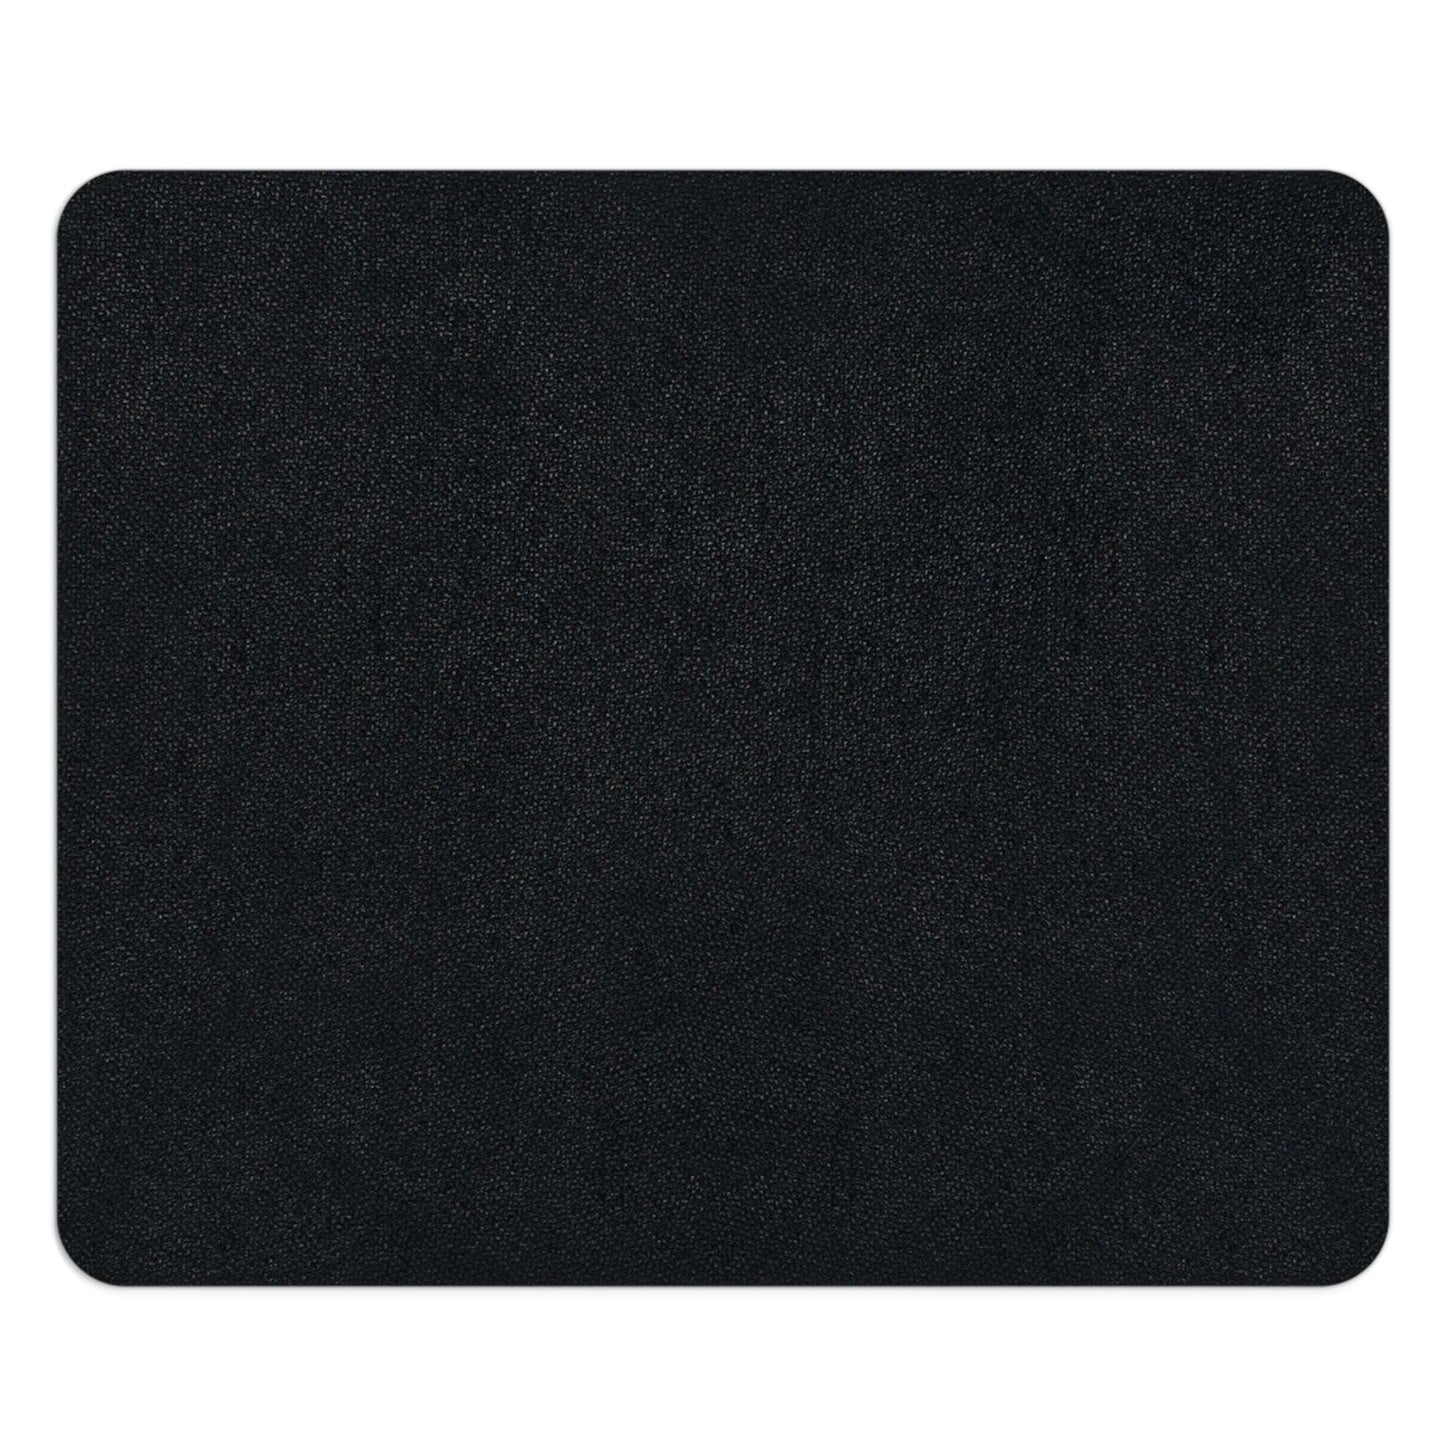 Computer Mouse Pad, Non-slip rubber bottom, White Flowers on Red